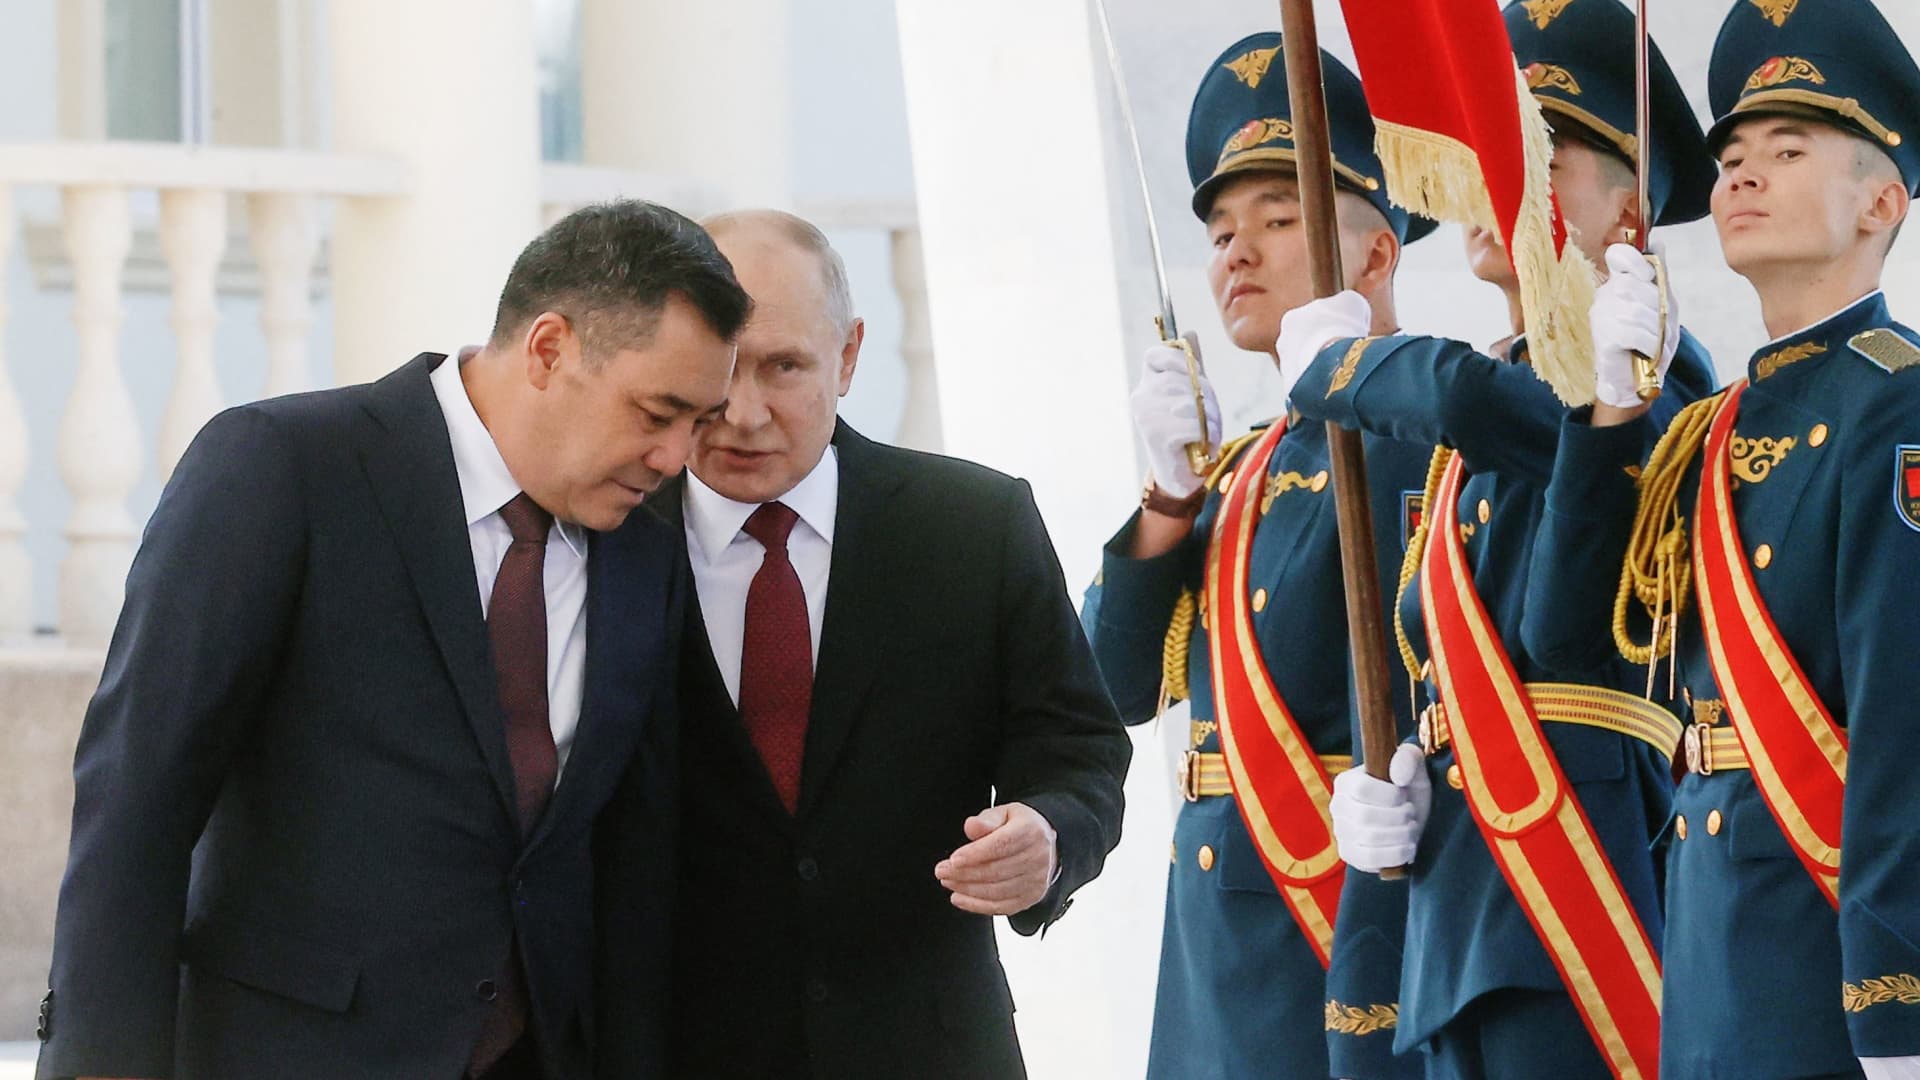 This pool photograph distributed by Russian state owned agency Sputnik shows Russia's President Vladimir Putin and his Kyrgyz counterpart Sadyr Japarov attending a welcoming ceremony prior to their talks in Bishkek on October 12, 2023.